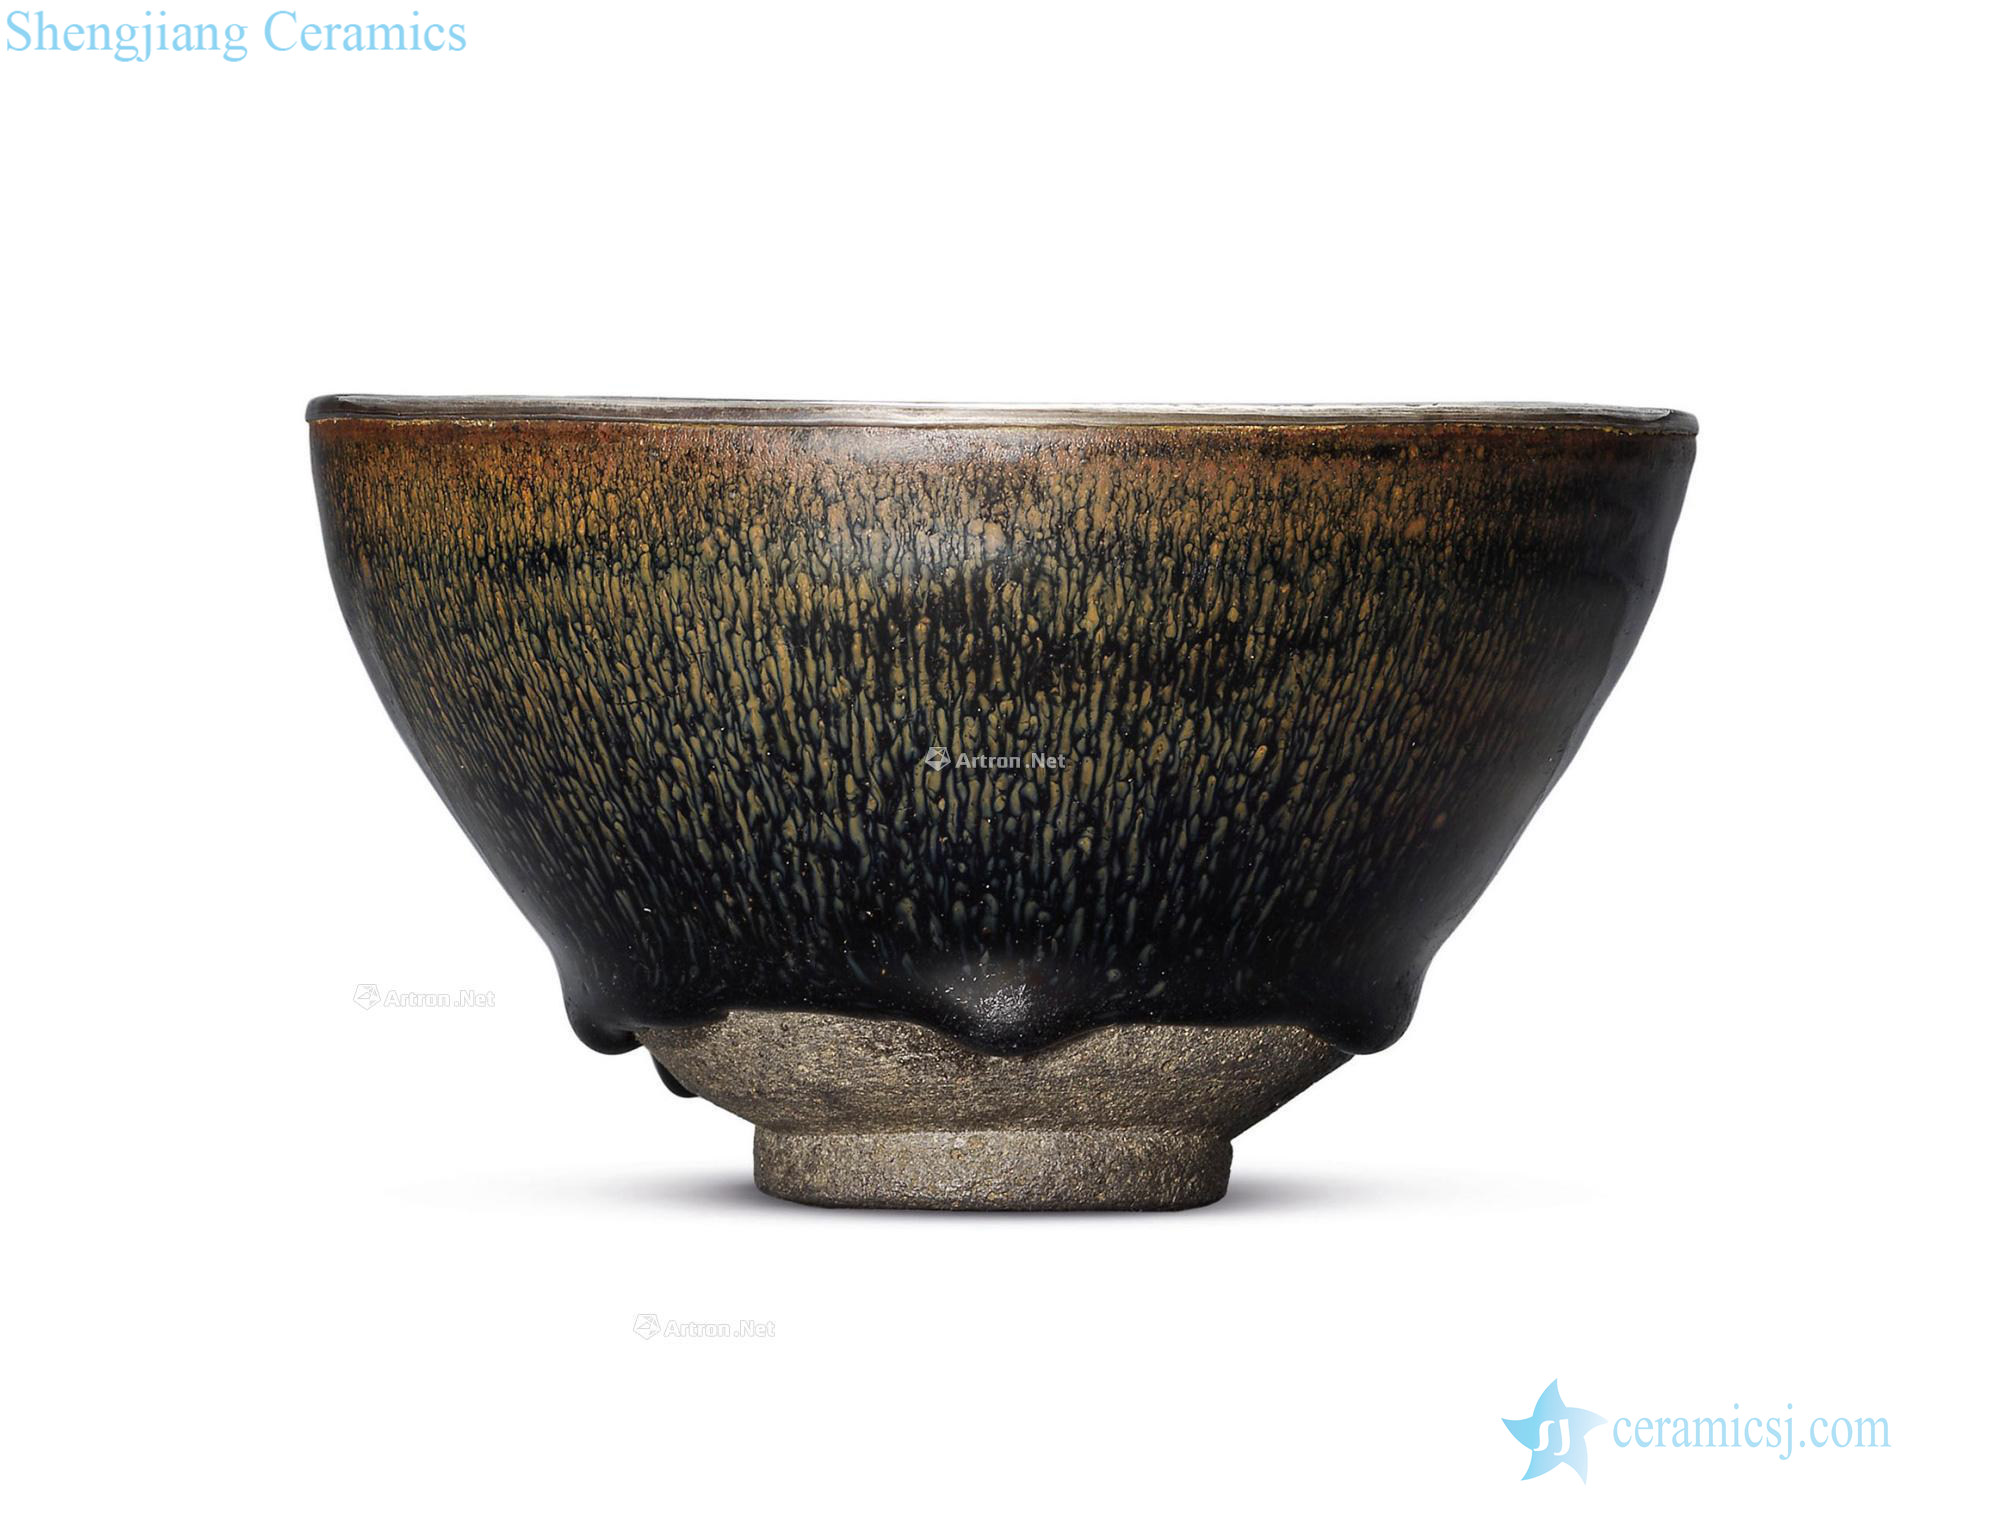 The southern song dynasty To build kilns black glaze TuHao lamp